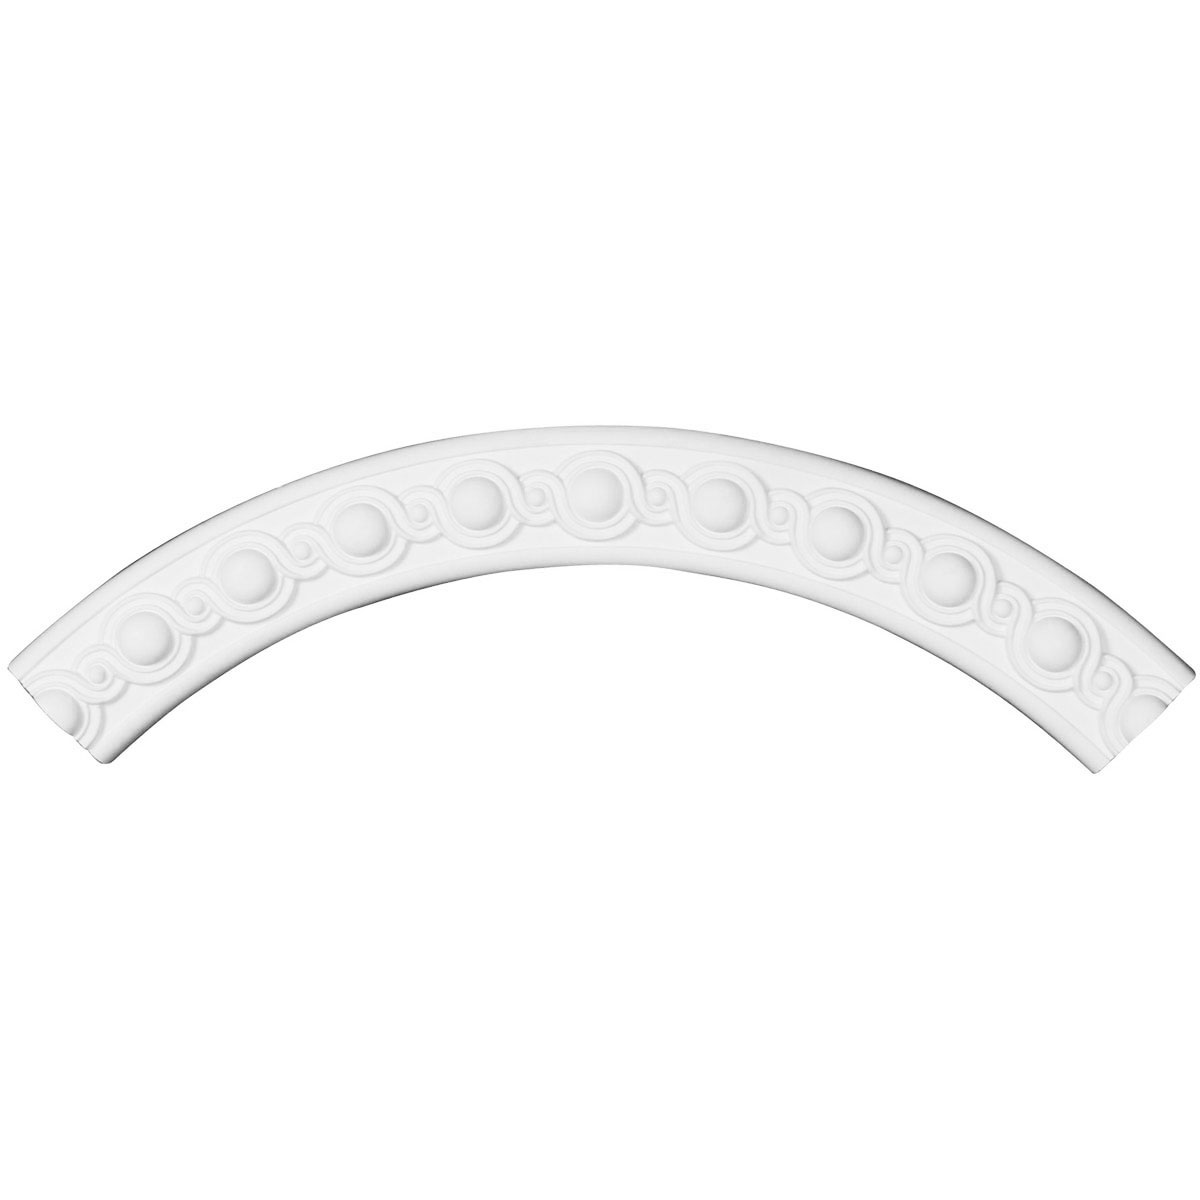 35.5 X 29.5 X 3 X 1 In. Hillsborough Ceiling Ring - 0.25 Of Complete Circle